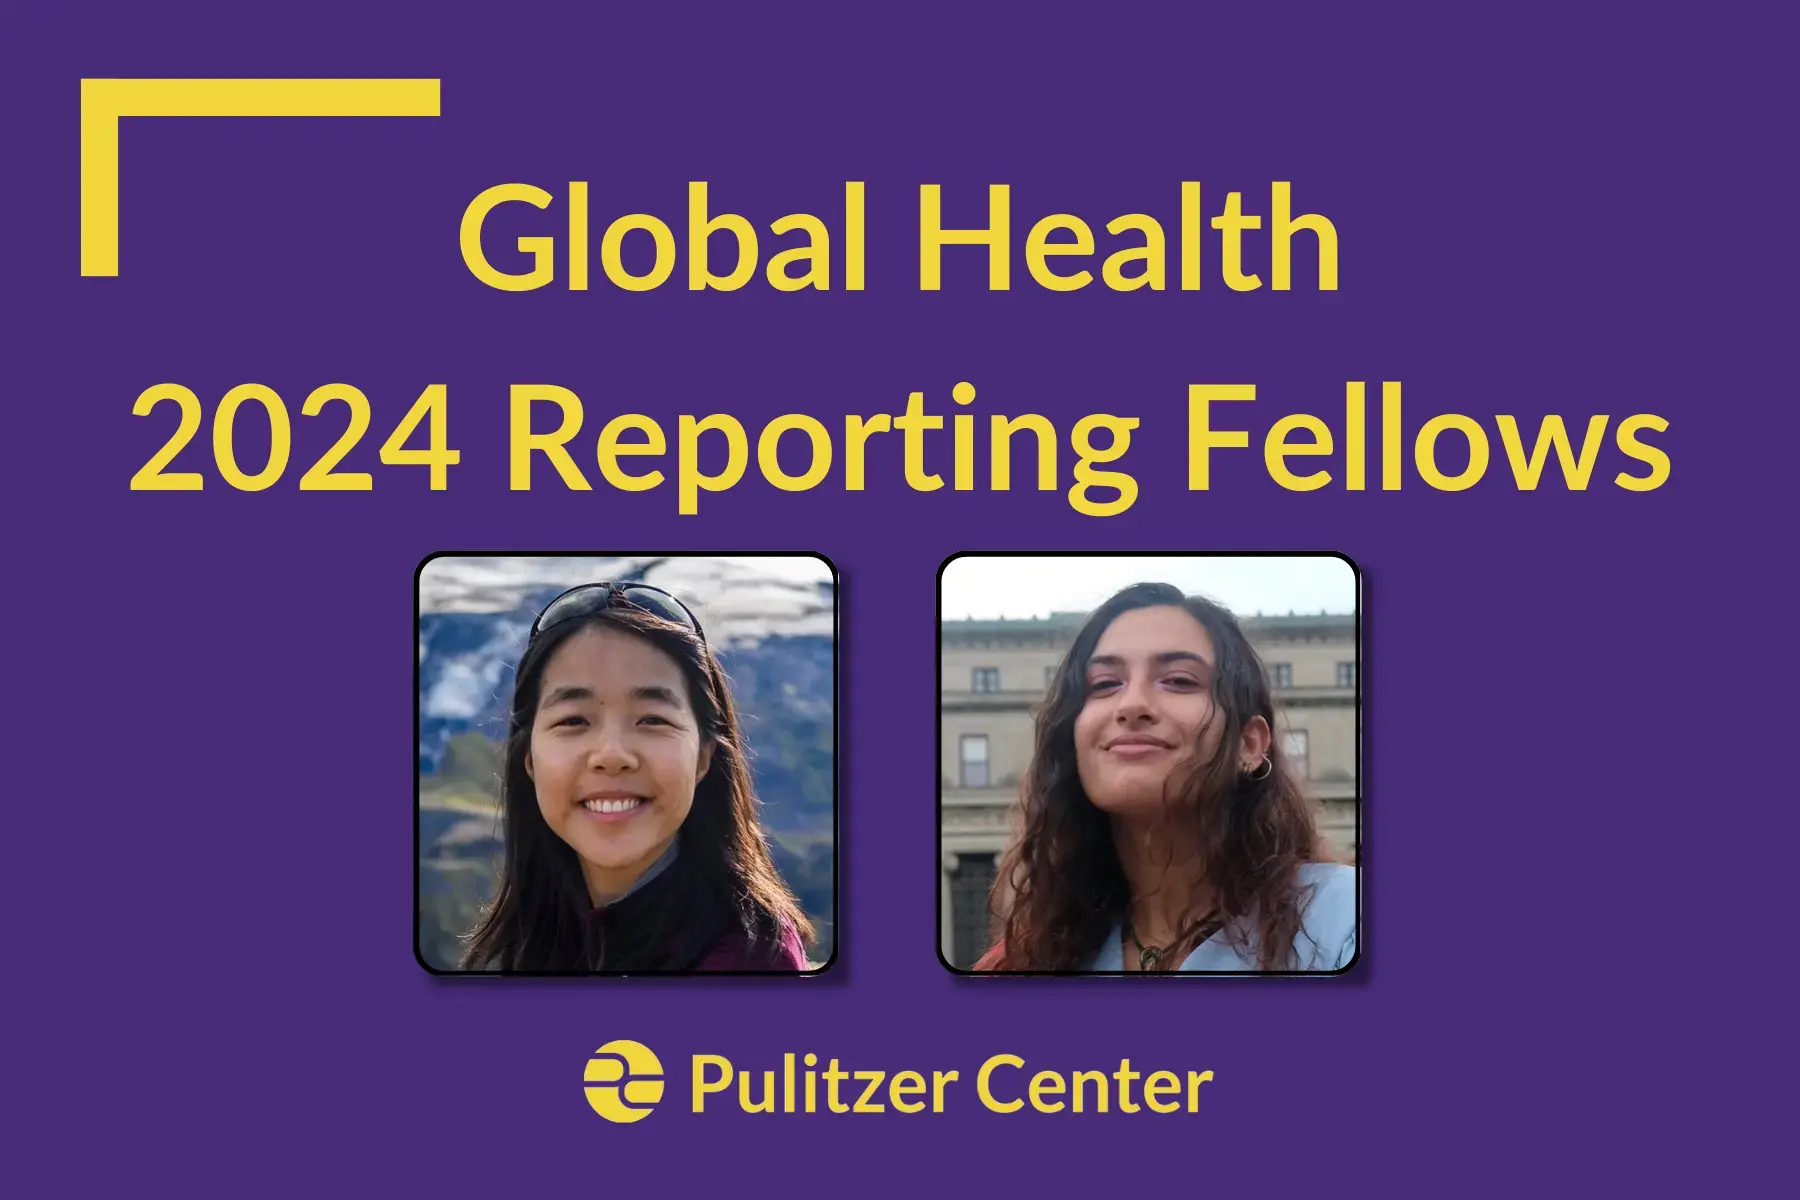 Announcing the 2024 Global Health Reporting Fellows Pulitzer Center